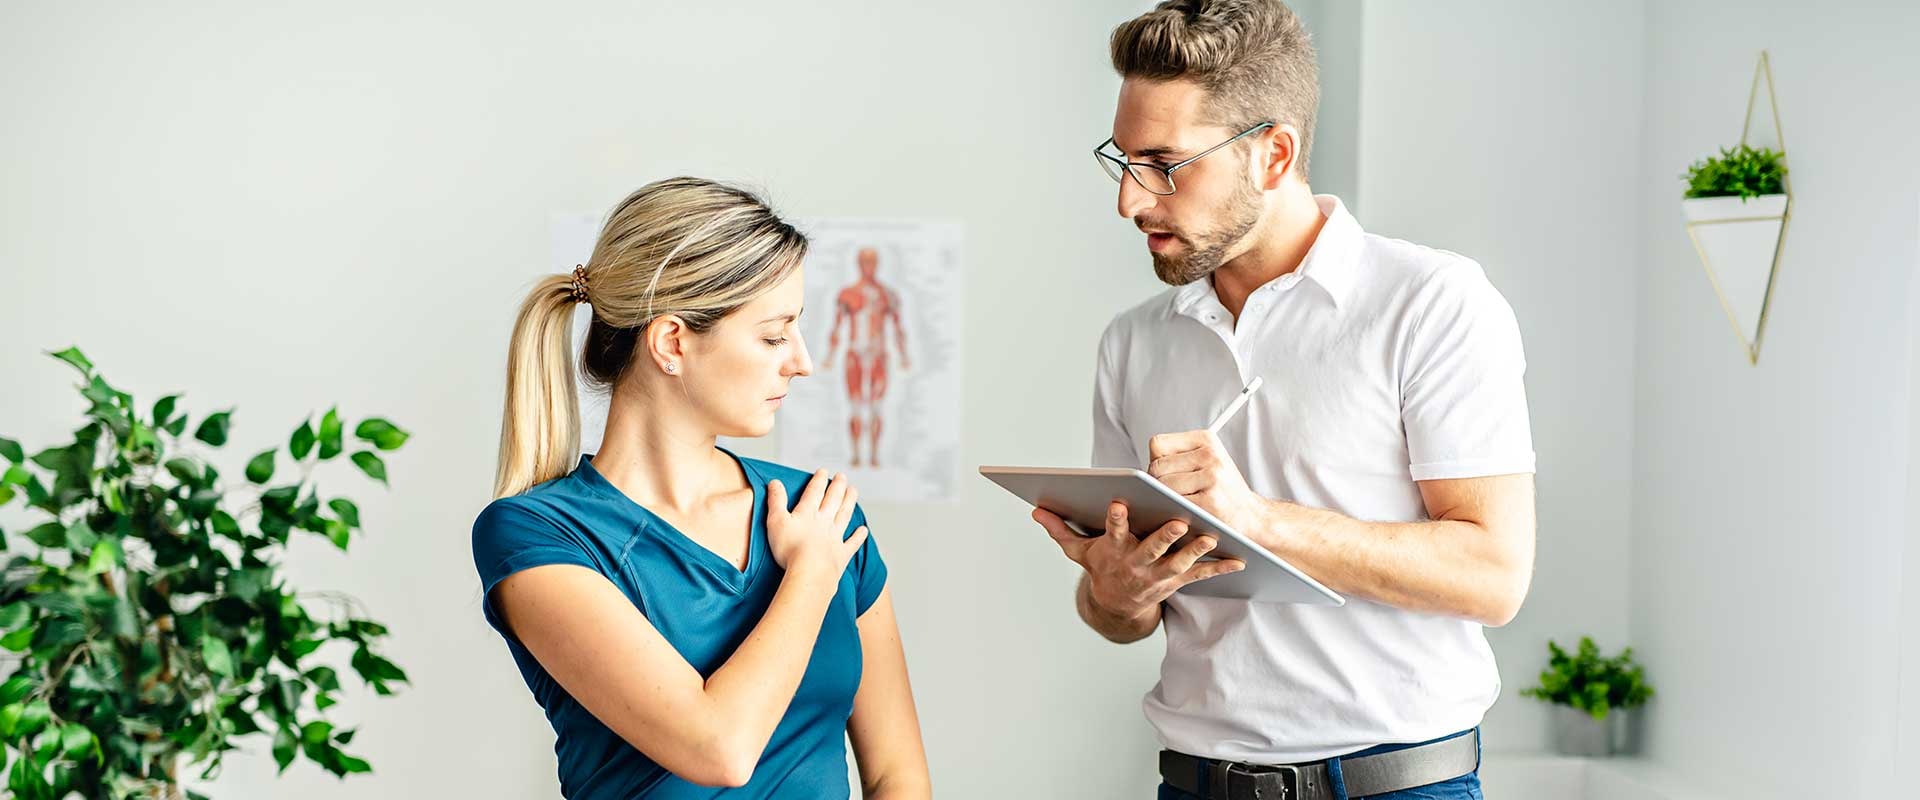 What is the role of chiropractic in health care?